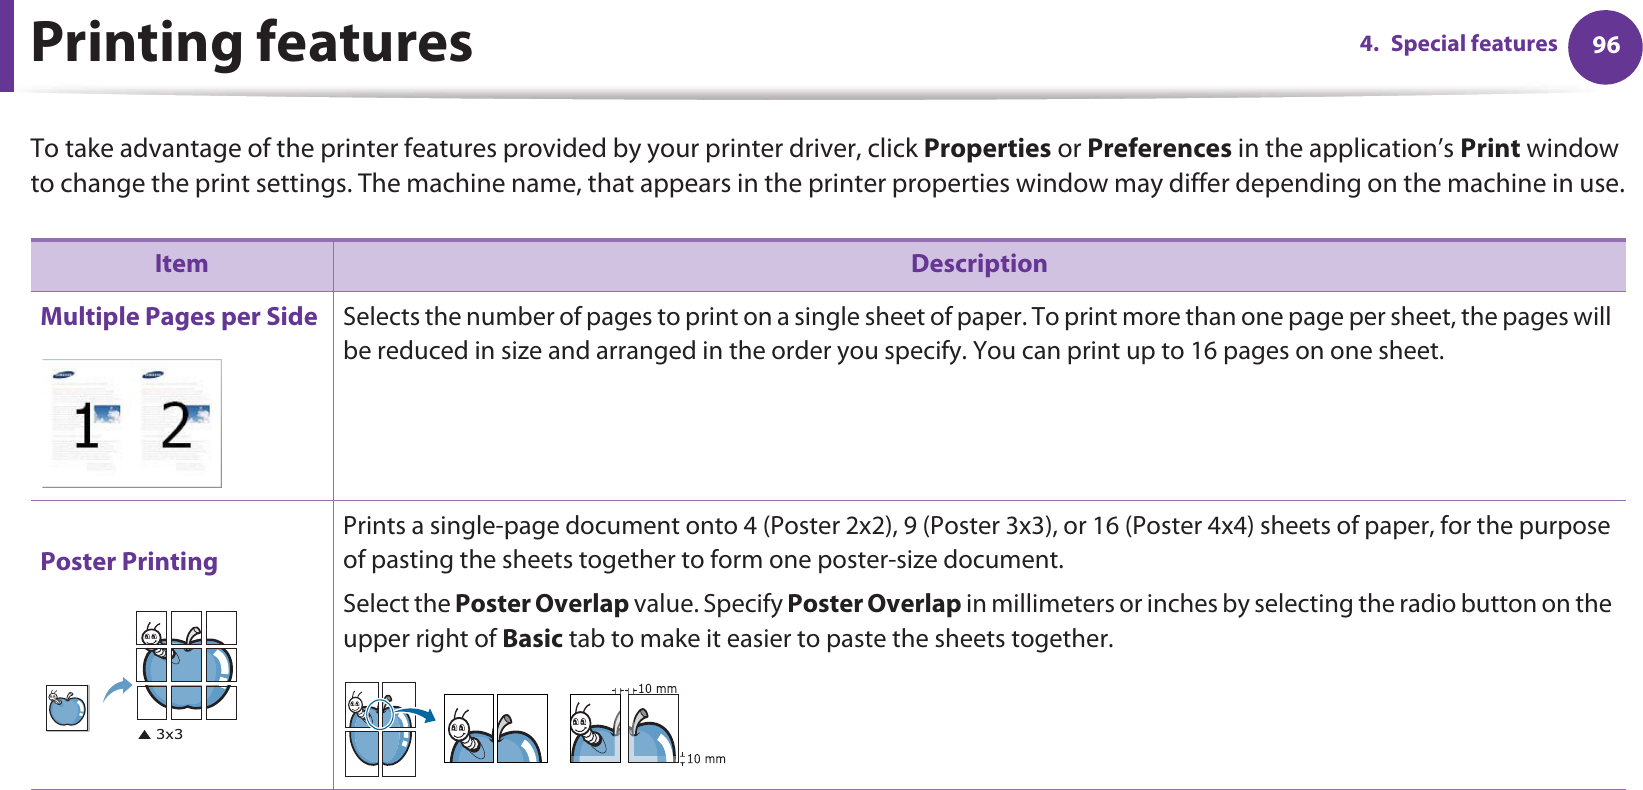 Printing features 964. Special featuresTo take advantage of the printer features provided by your printer driver, click Properties or Preferences in the application’s Print window to change the print settings. The machine name, that appears in the printer properties window may differ depending on the machine in use. Item DescriptionMultiple Pages per Side Selects the number of pages to print on a single sheet of paper. To print more than one page per sheet, the pages will be reduced in size and arranged in the order you specify. You can print up to 16 pages on one sheet. Poster PrintingPrints a single-page document onto 4 (Poster 2x2), 9 (Poster 3x3), or 16 (Poster 4x4) sheets of paper, for the purpose of pasting the sheets together to form one poster-size document.Select the Poster Overlap value. Specify Poster Overlap in millimeters or inches by selecting the radio button on the upper right of Basic tab to make it easier to paste the sheets together.